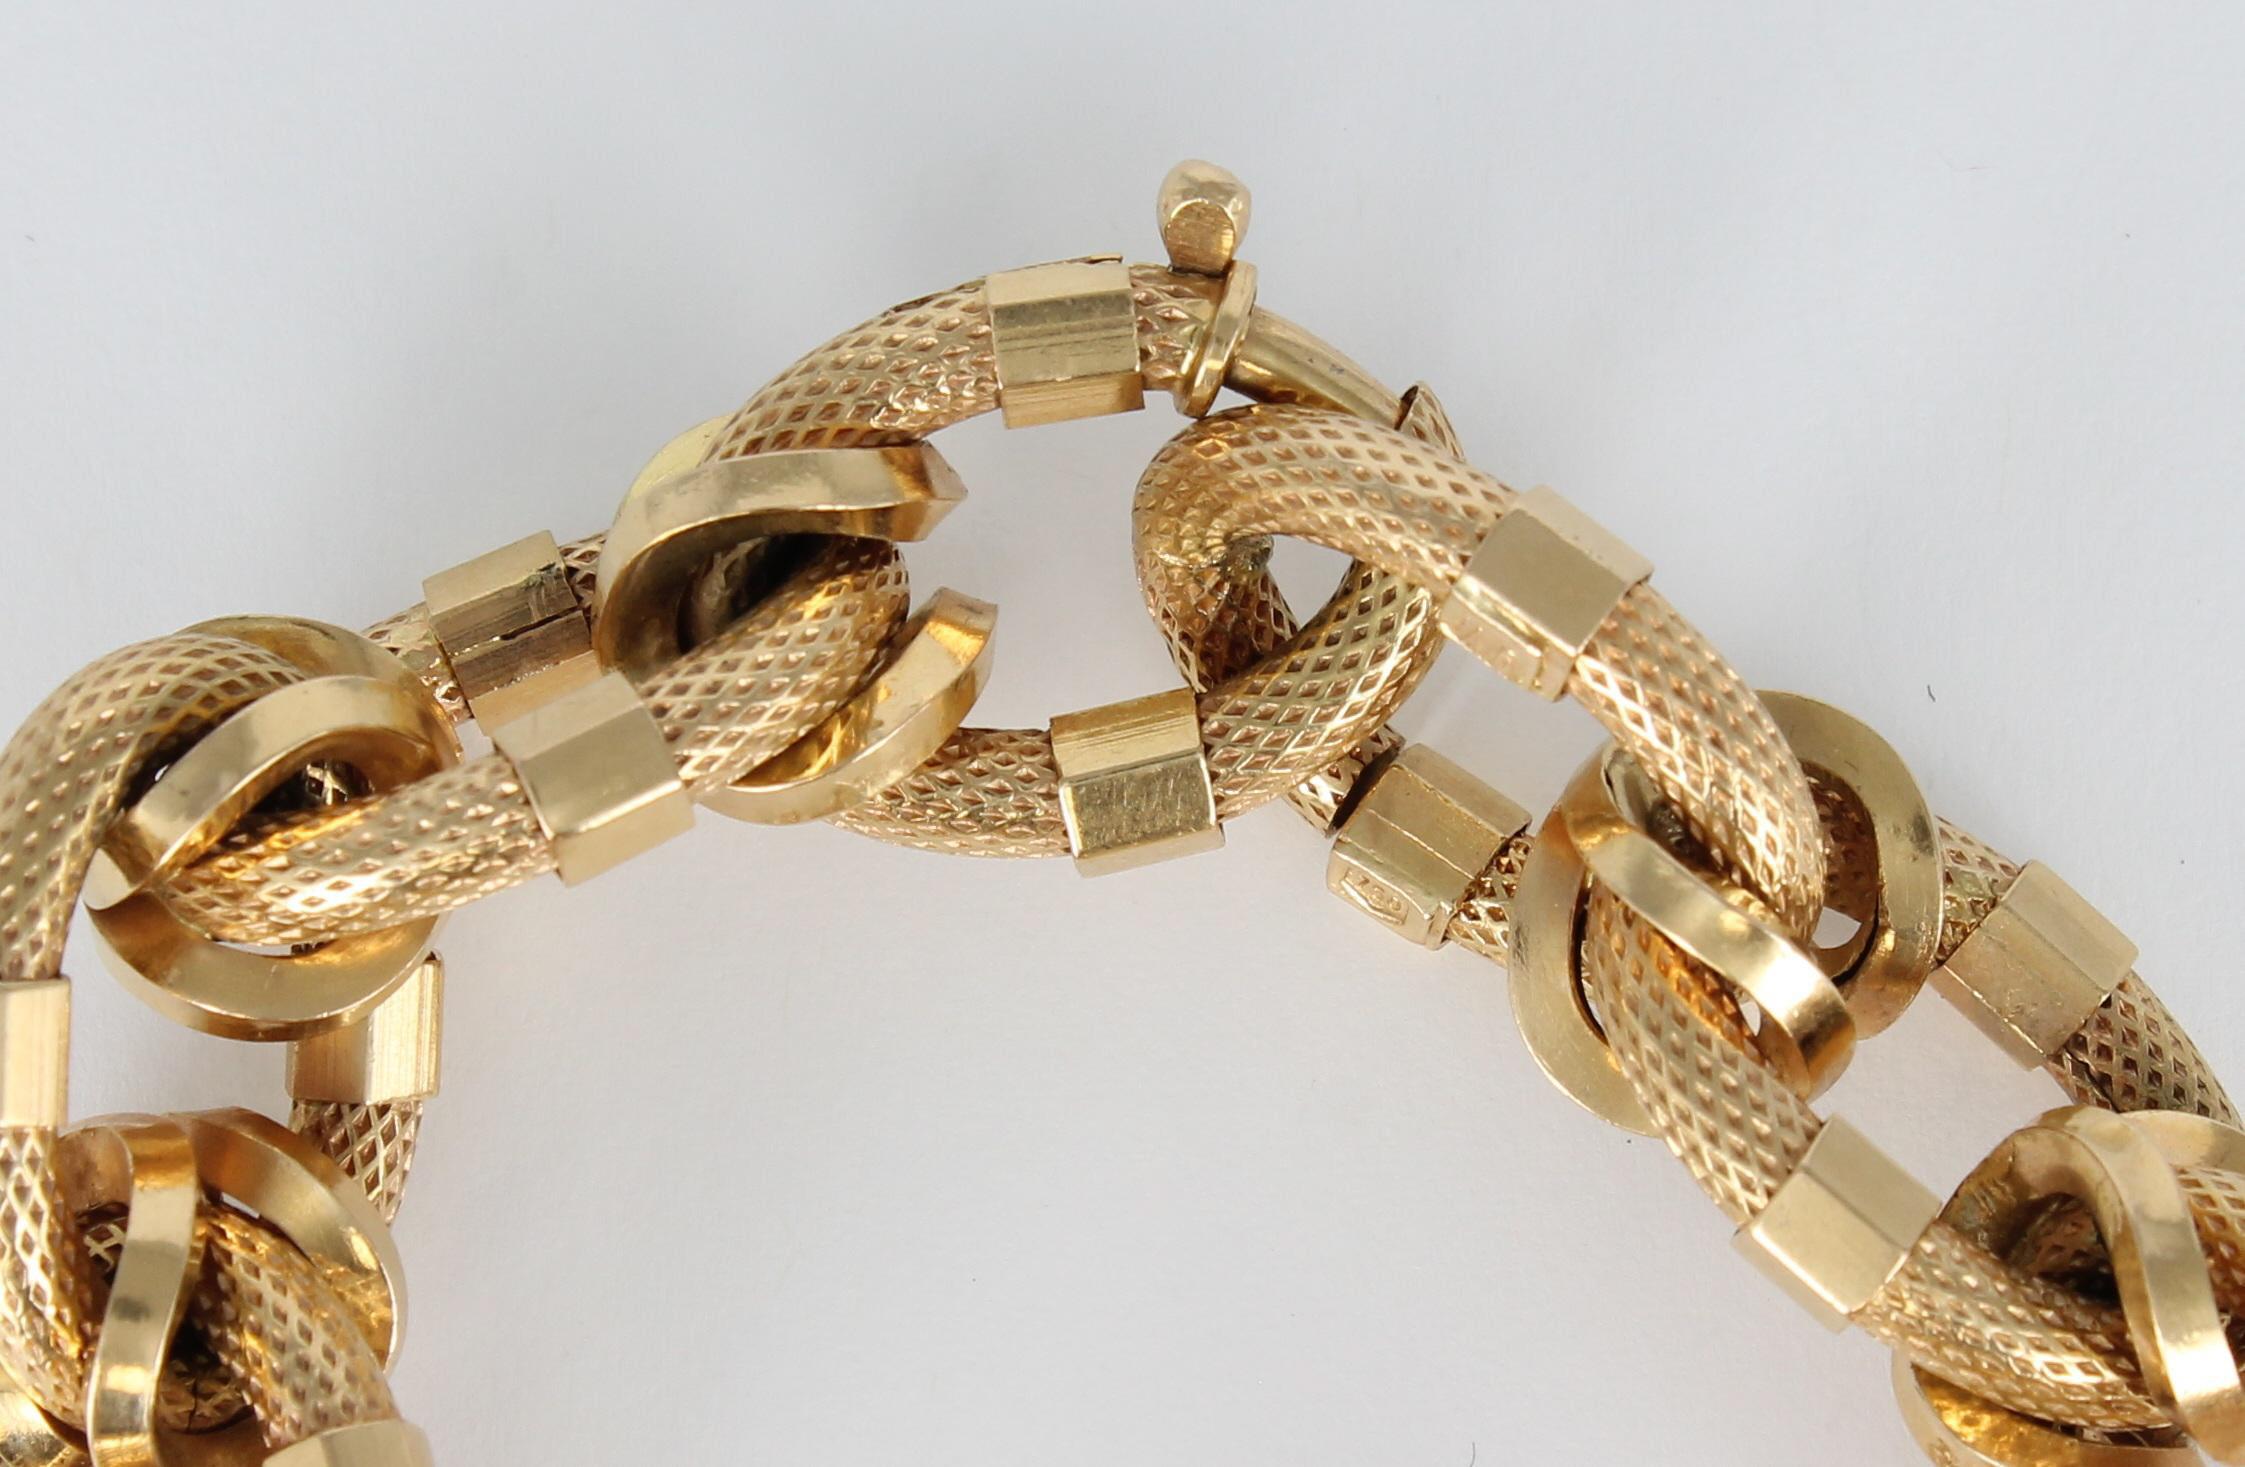 Beautifully rendered textured links connect to create this stunning 9 inch 18 karat yellow gold bracelet.  The links are 1 inch long and 5/8 inch wide and are connected by polished gold links.  Wrap your wrist in a masterful maze of links when